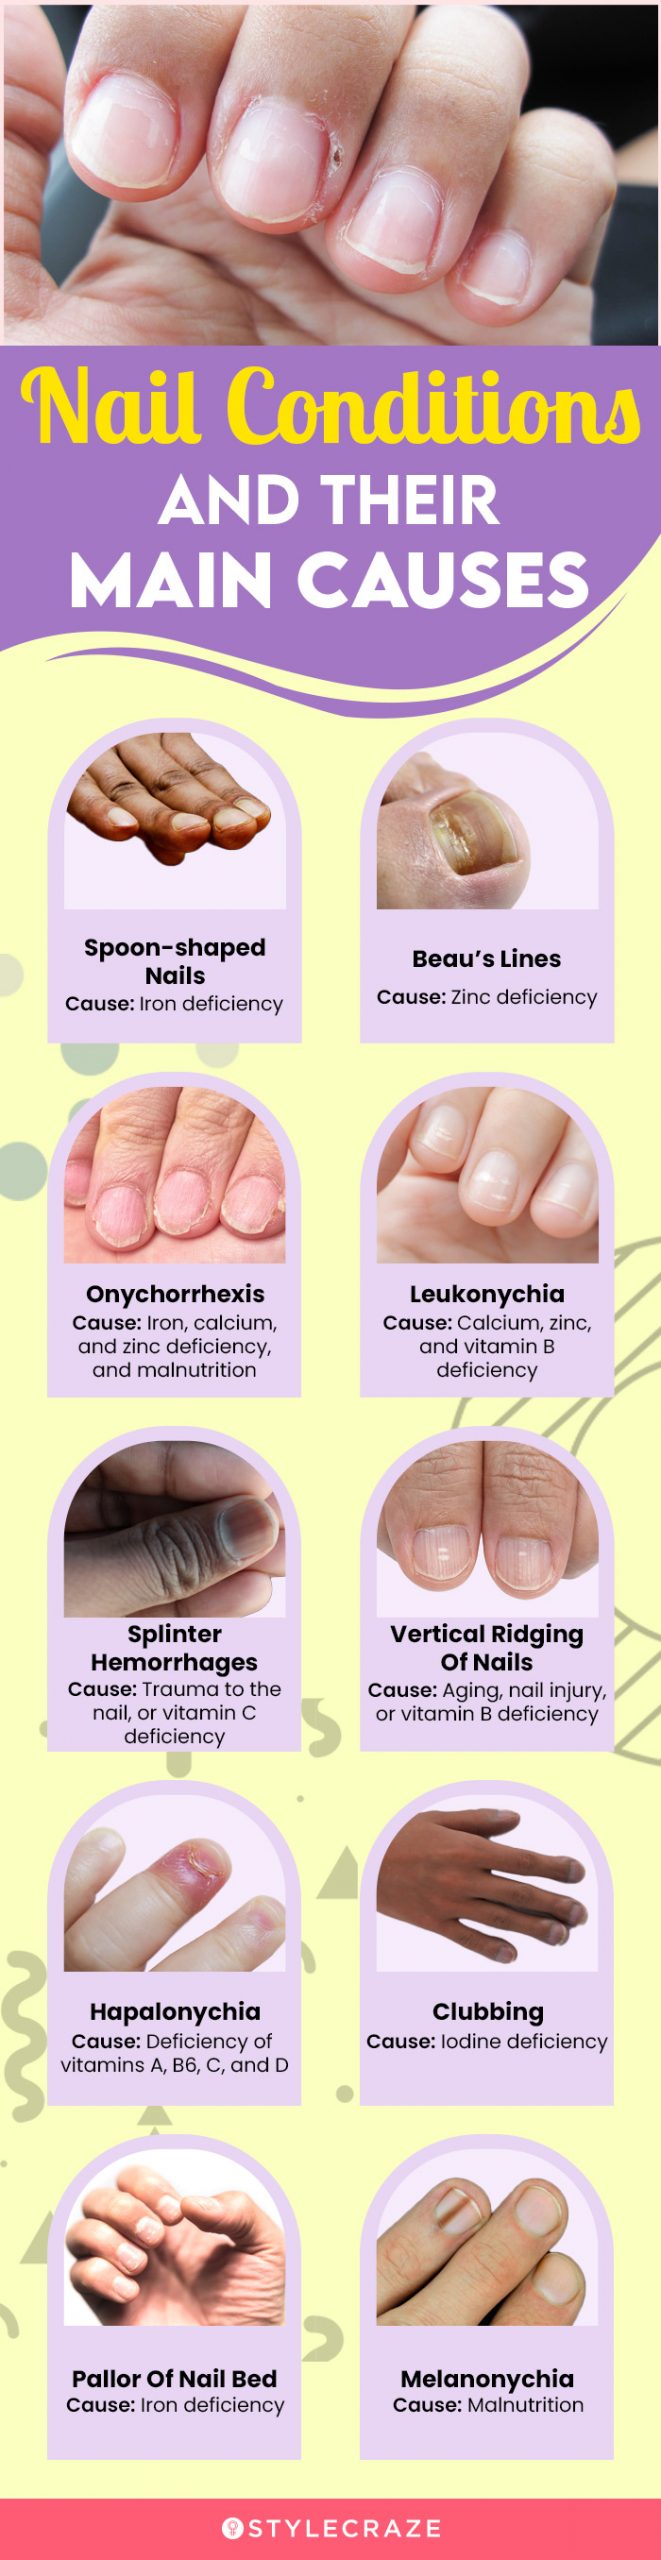 nail conditions and their main causes (infographic)